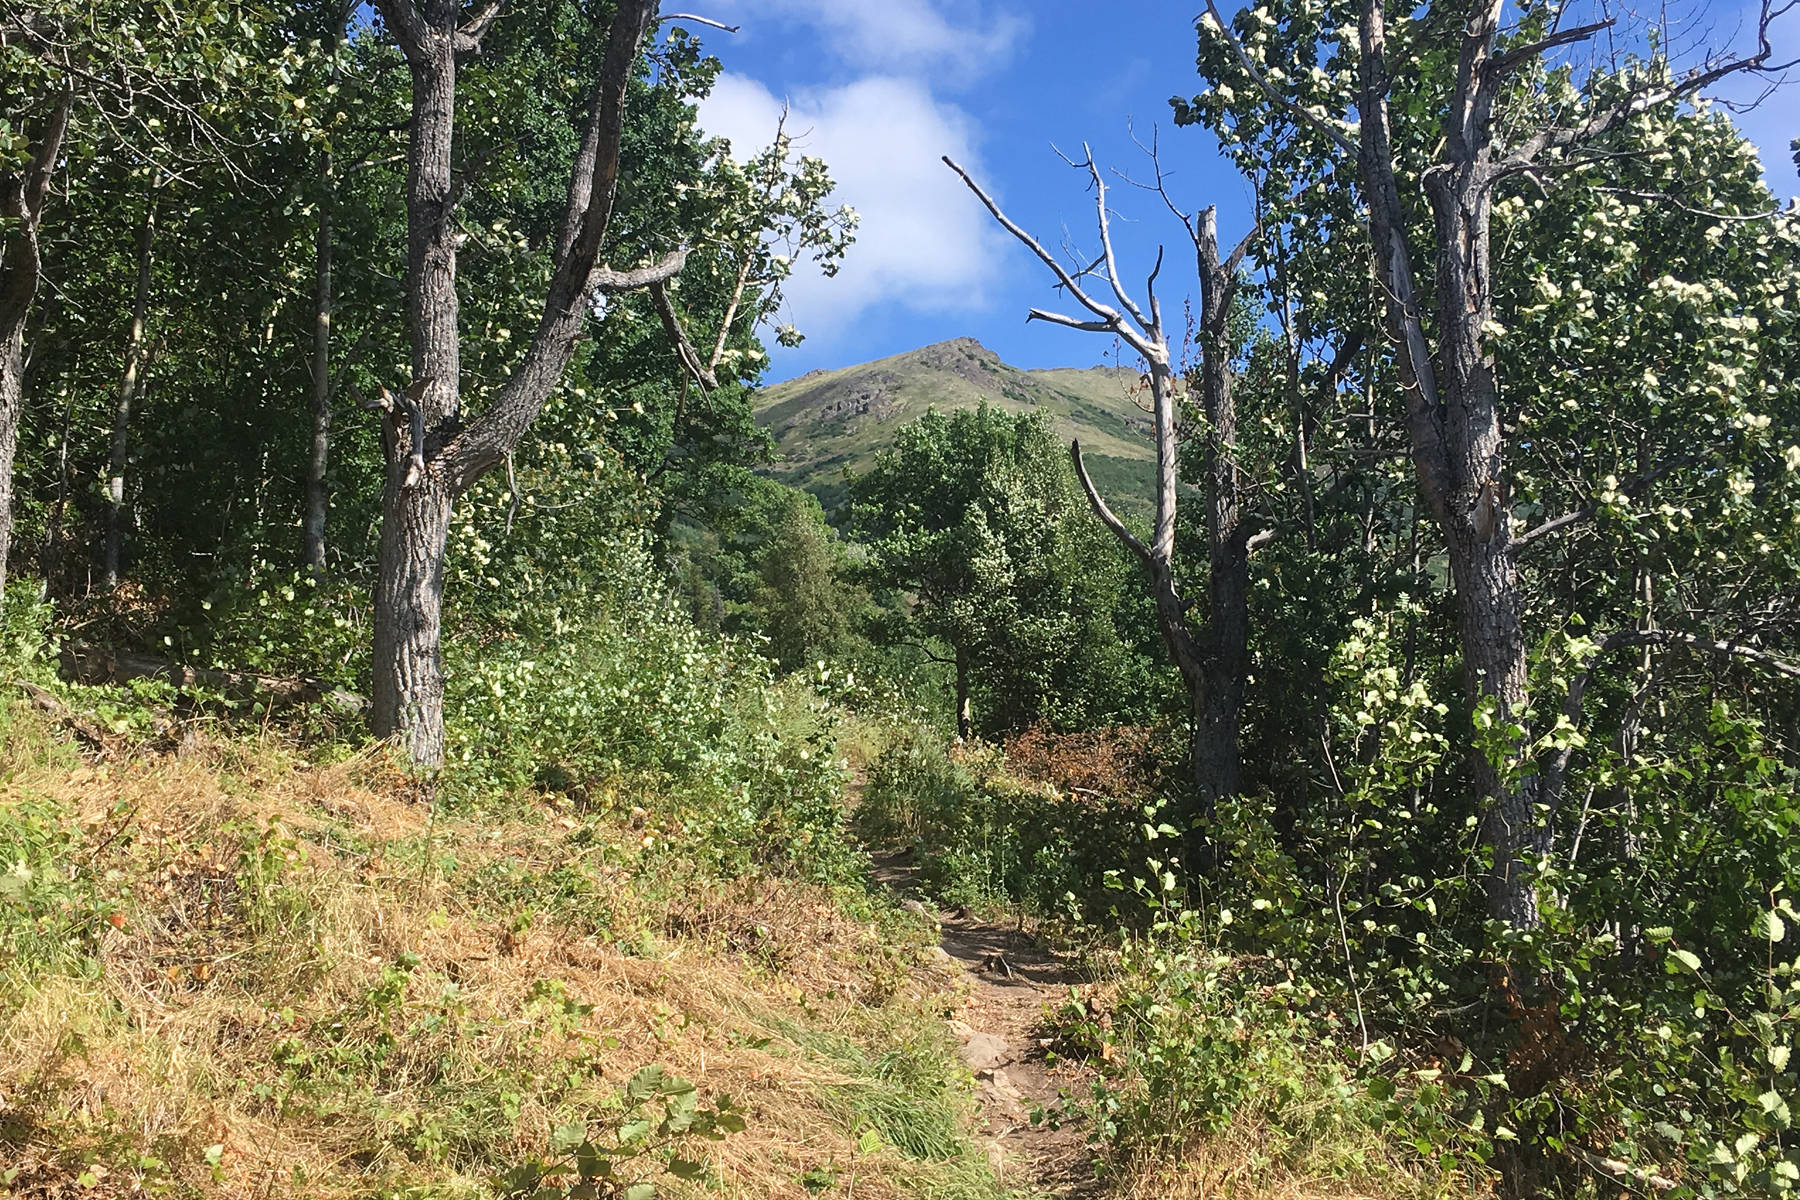 The Skyline trail appears brushed out Aug. 2, 2019. (Photo by Jeff Helminiak/Peninsula Clarion)